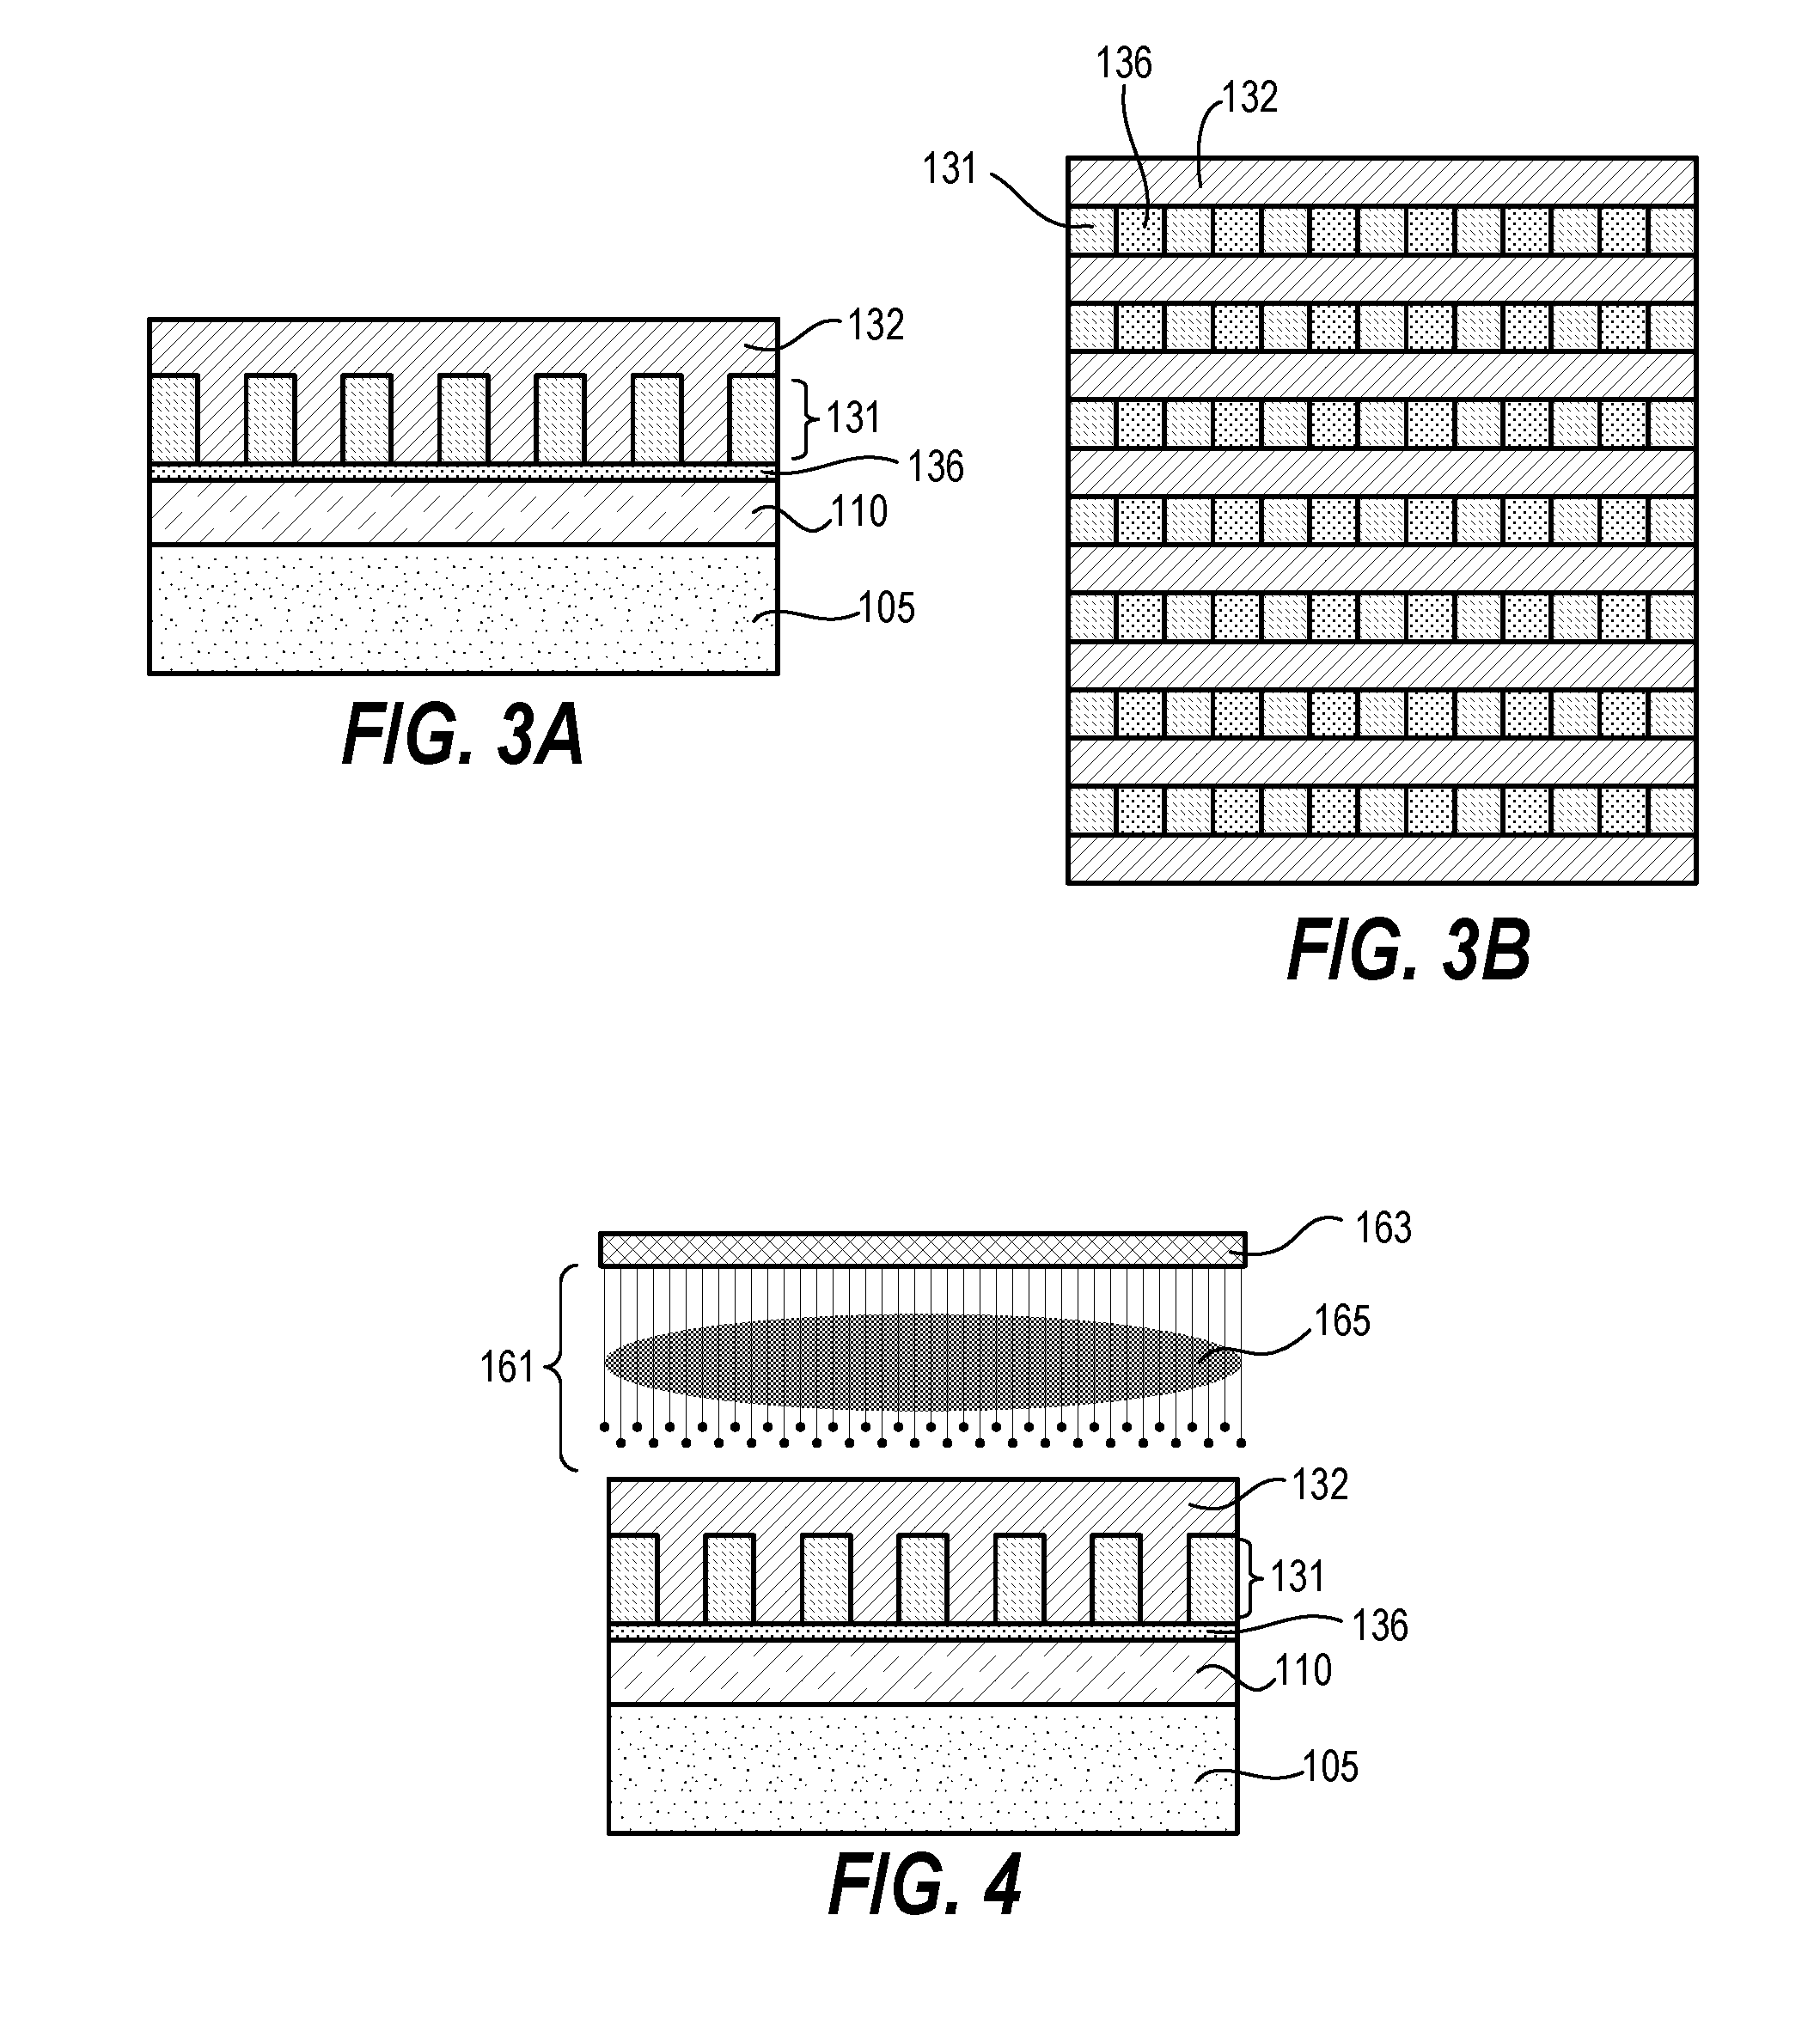 Method for Patterning Using a Composite Pattern